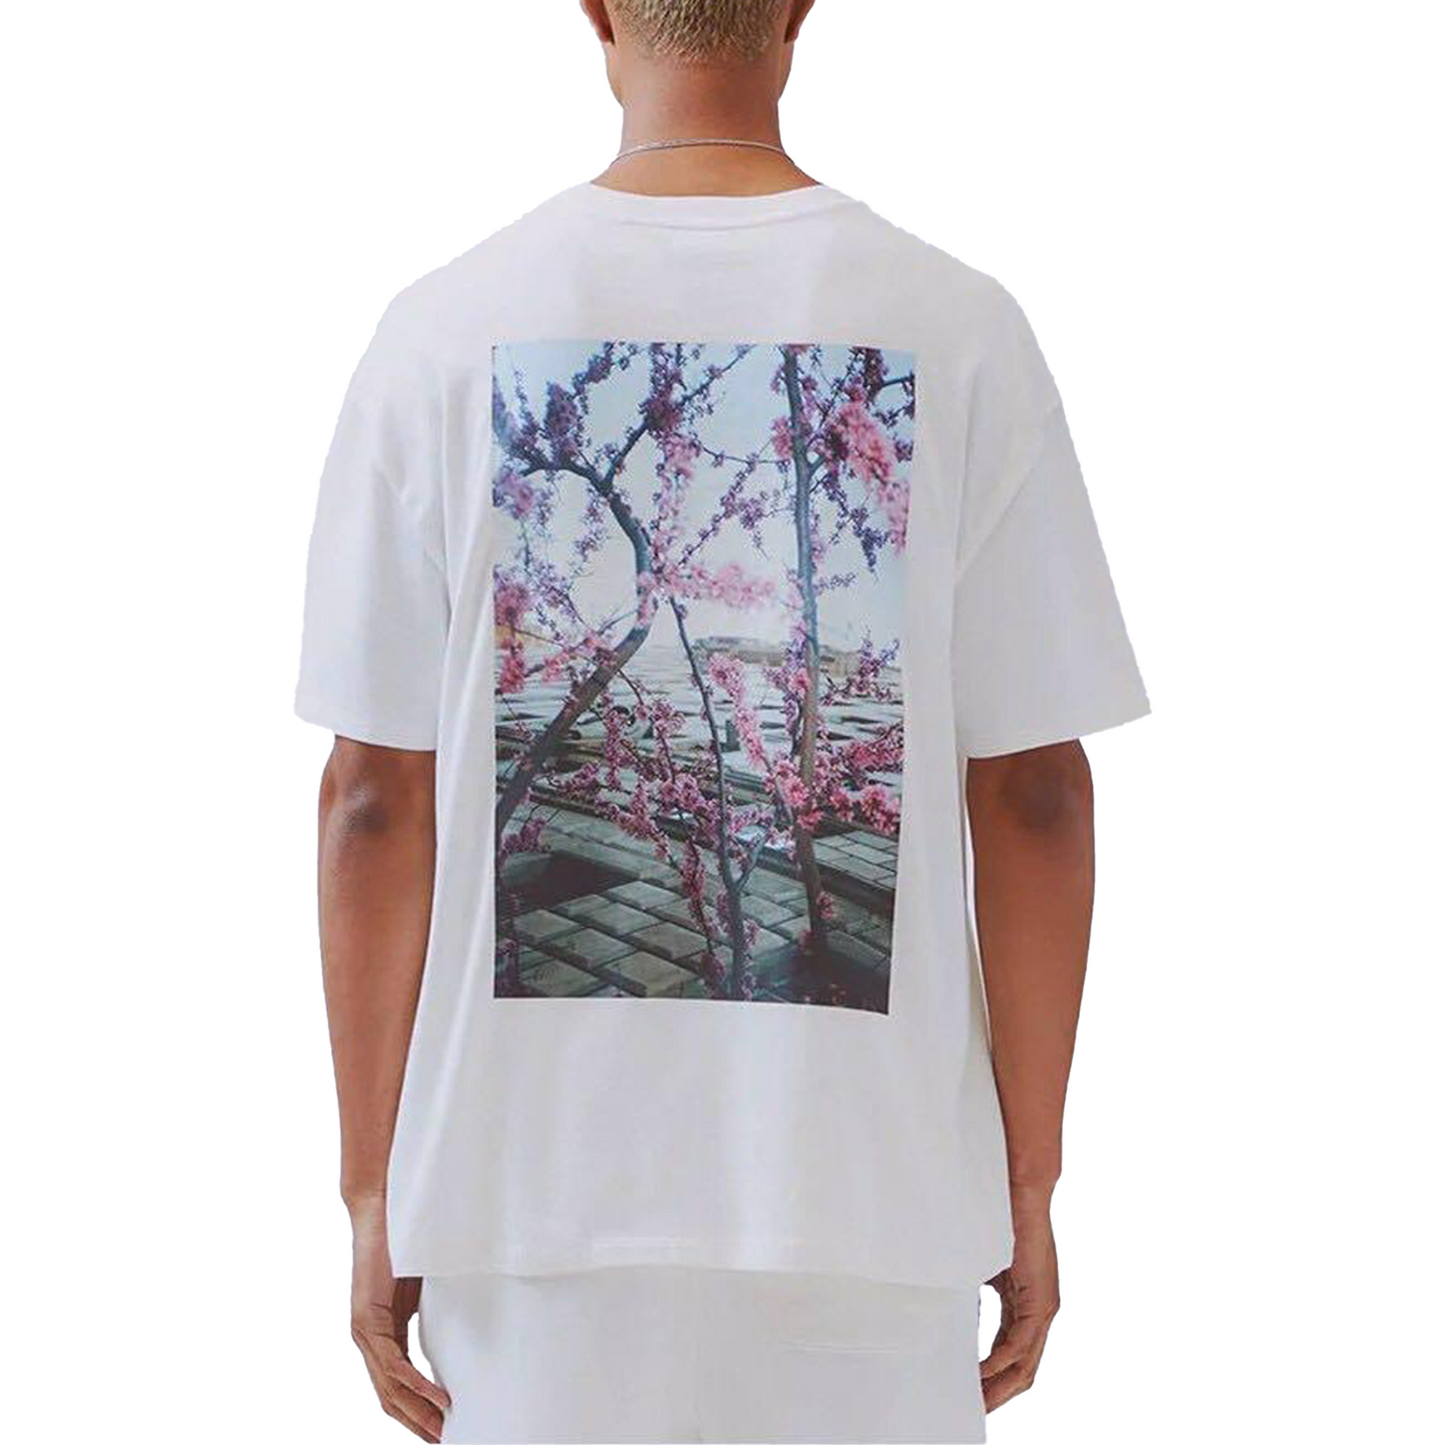 Fear of God Essentials Photo Series Tee White